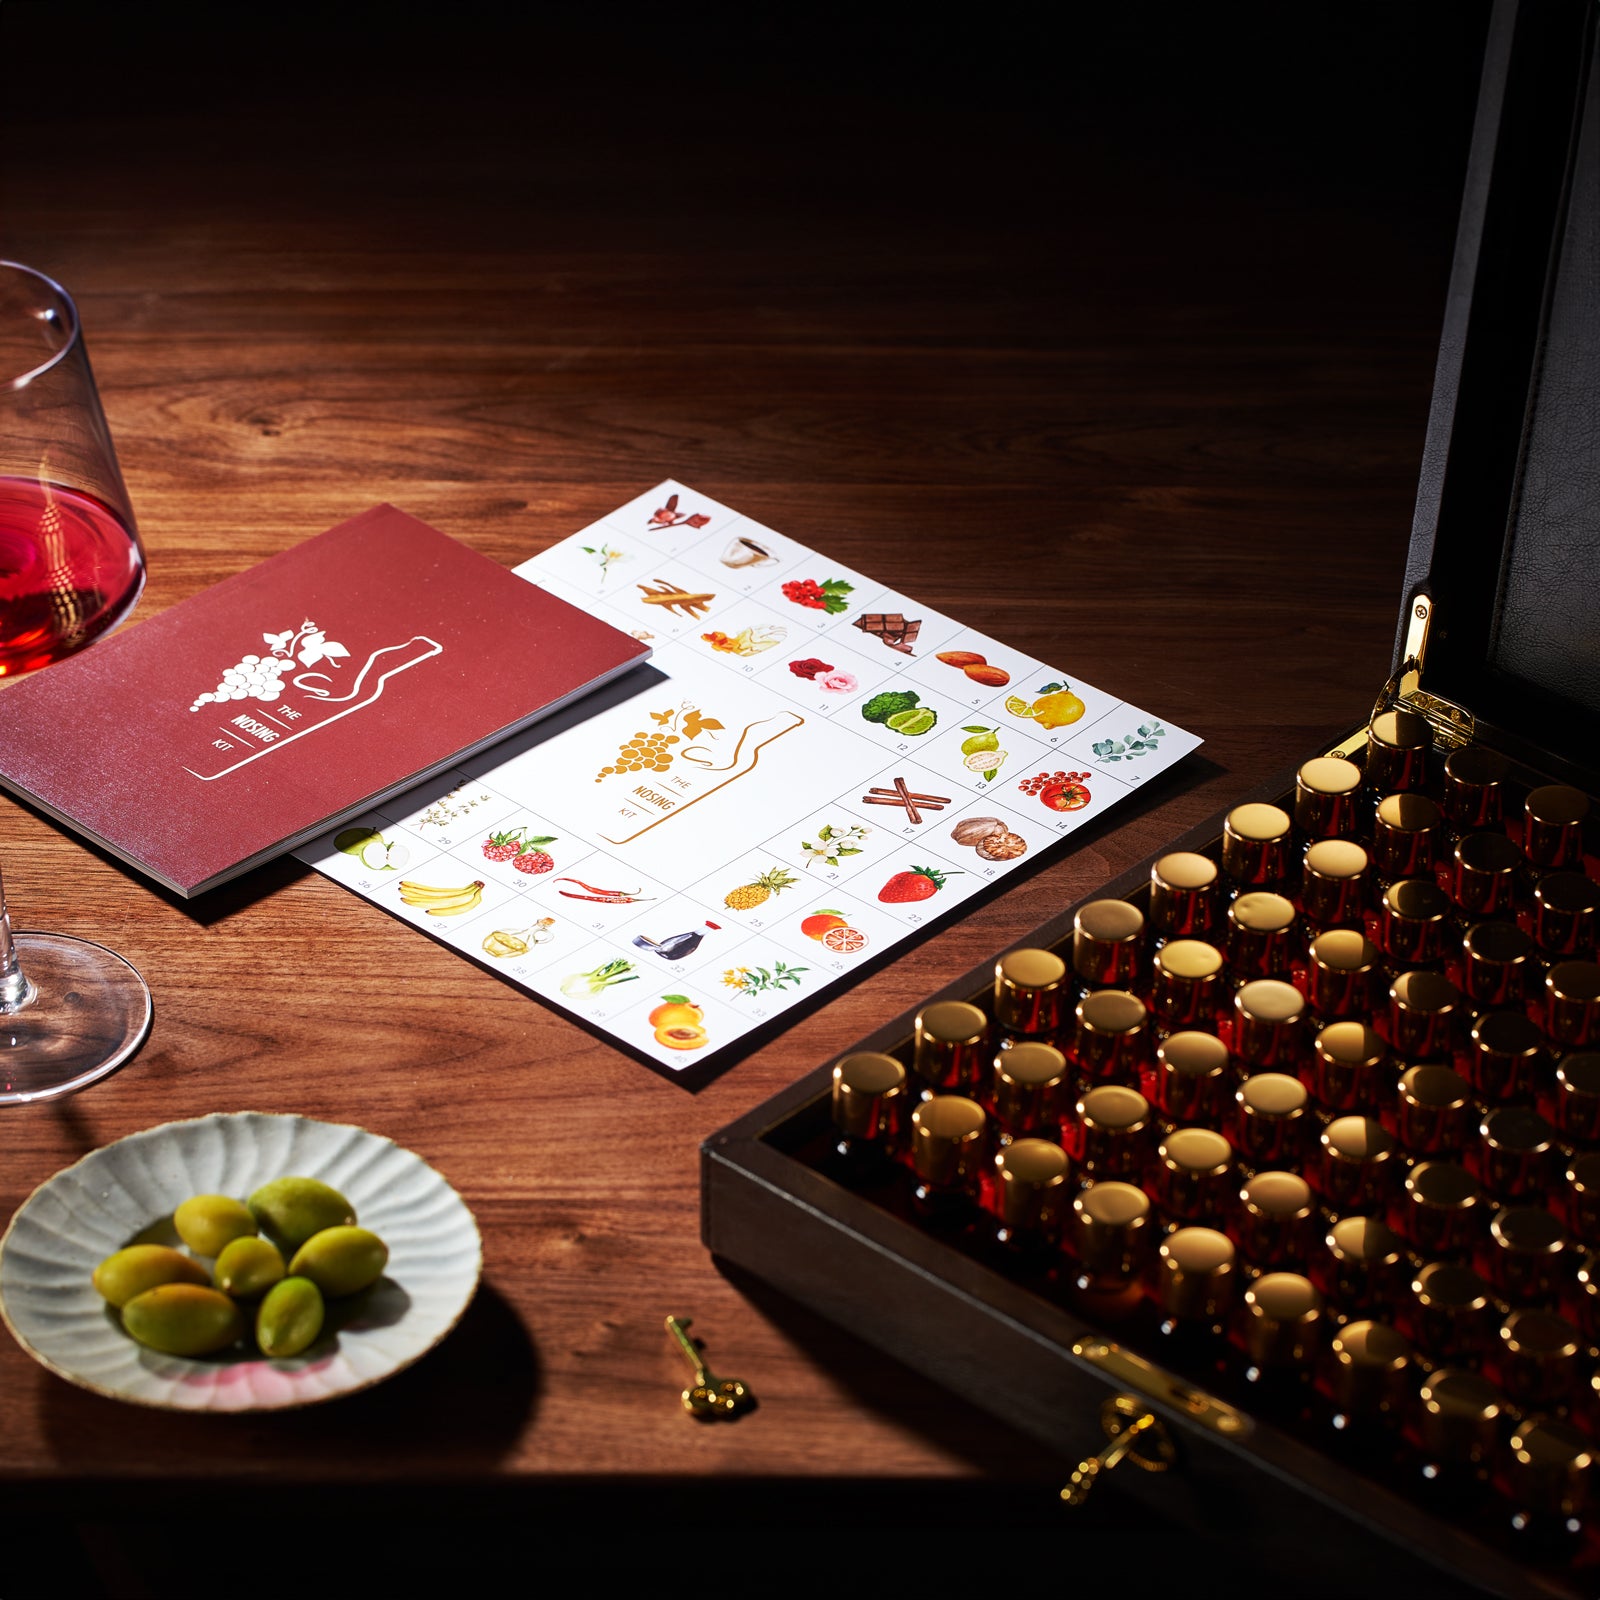 Sommelier Wine Aroma Kit - The Nosing Kit by The Wine Savant - Master